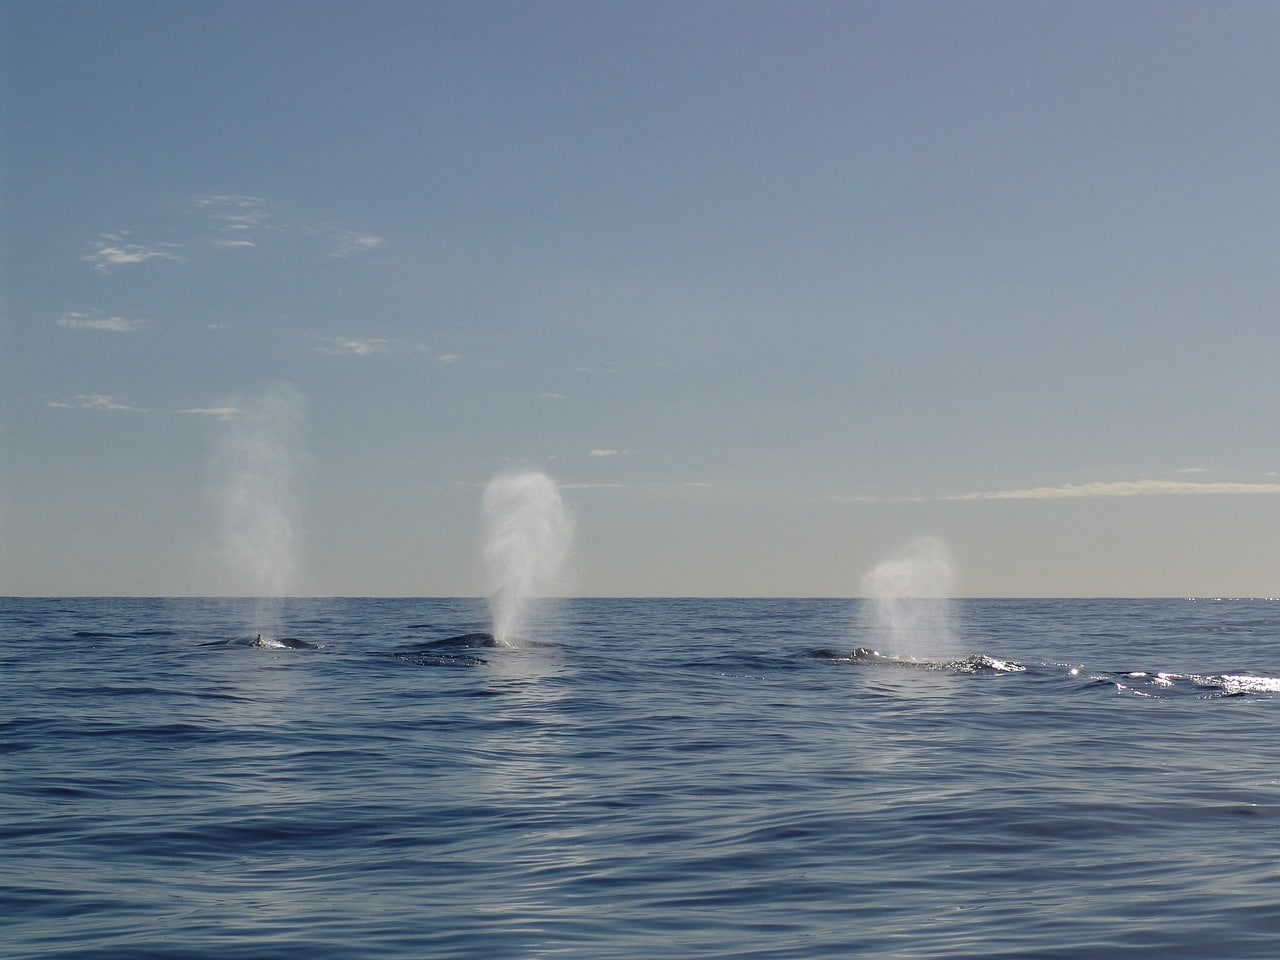 Group of humpback whales in the ocean.